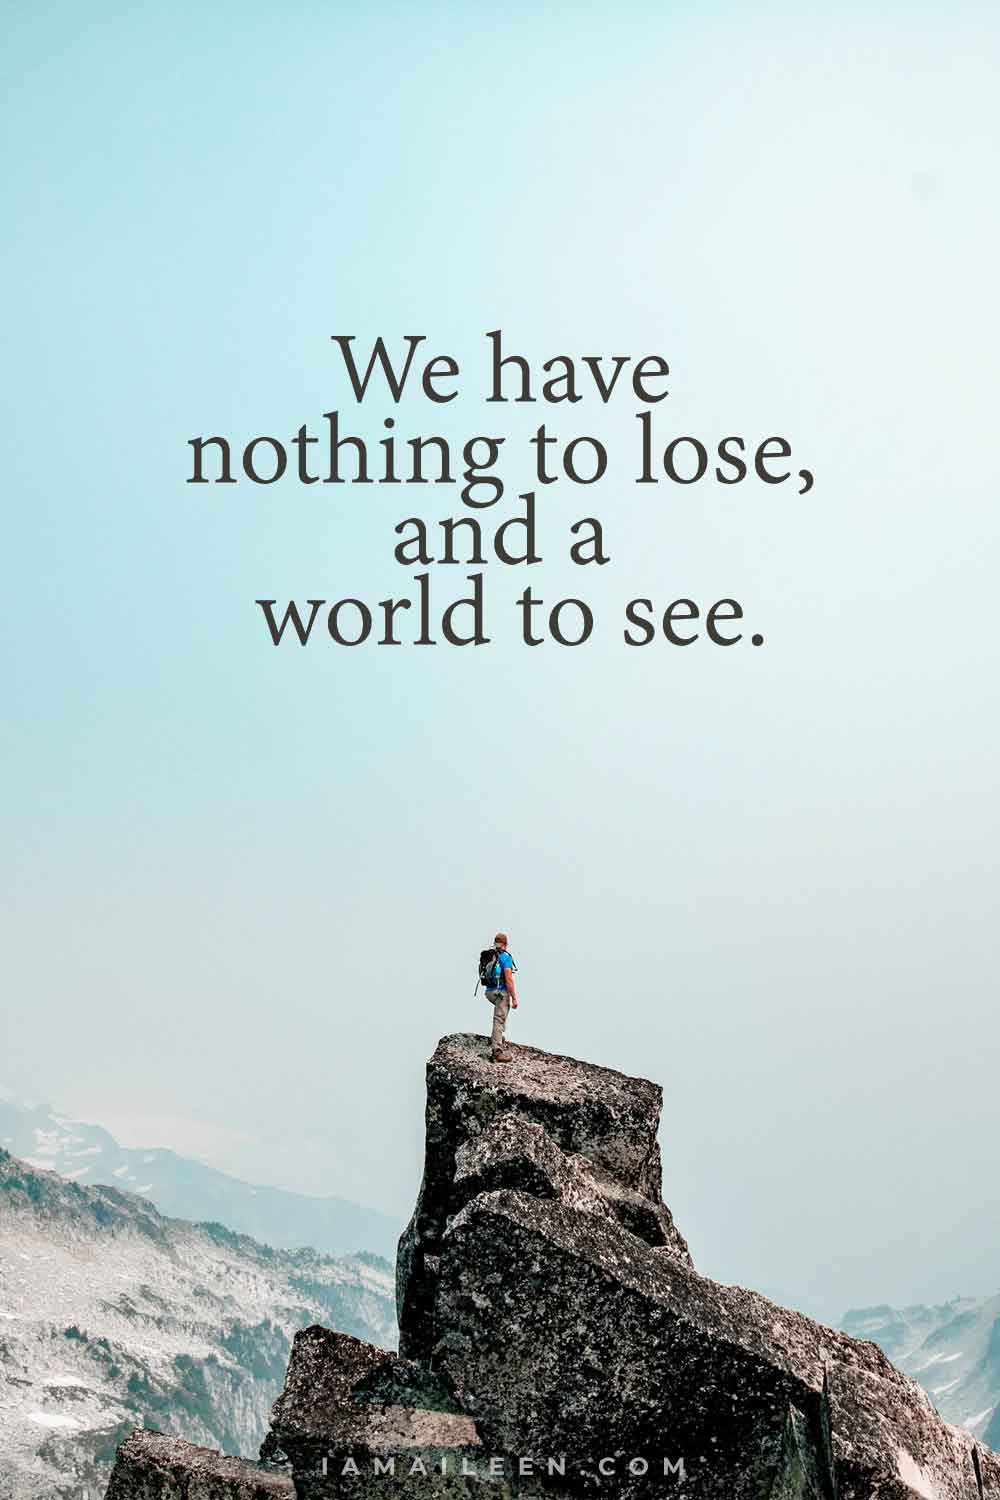 We have nothing to lose, and a world to see.